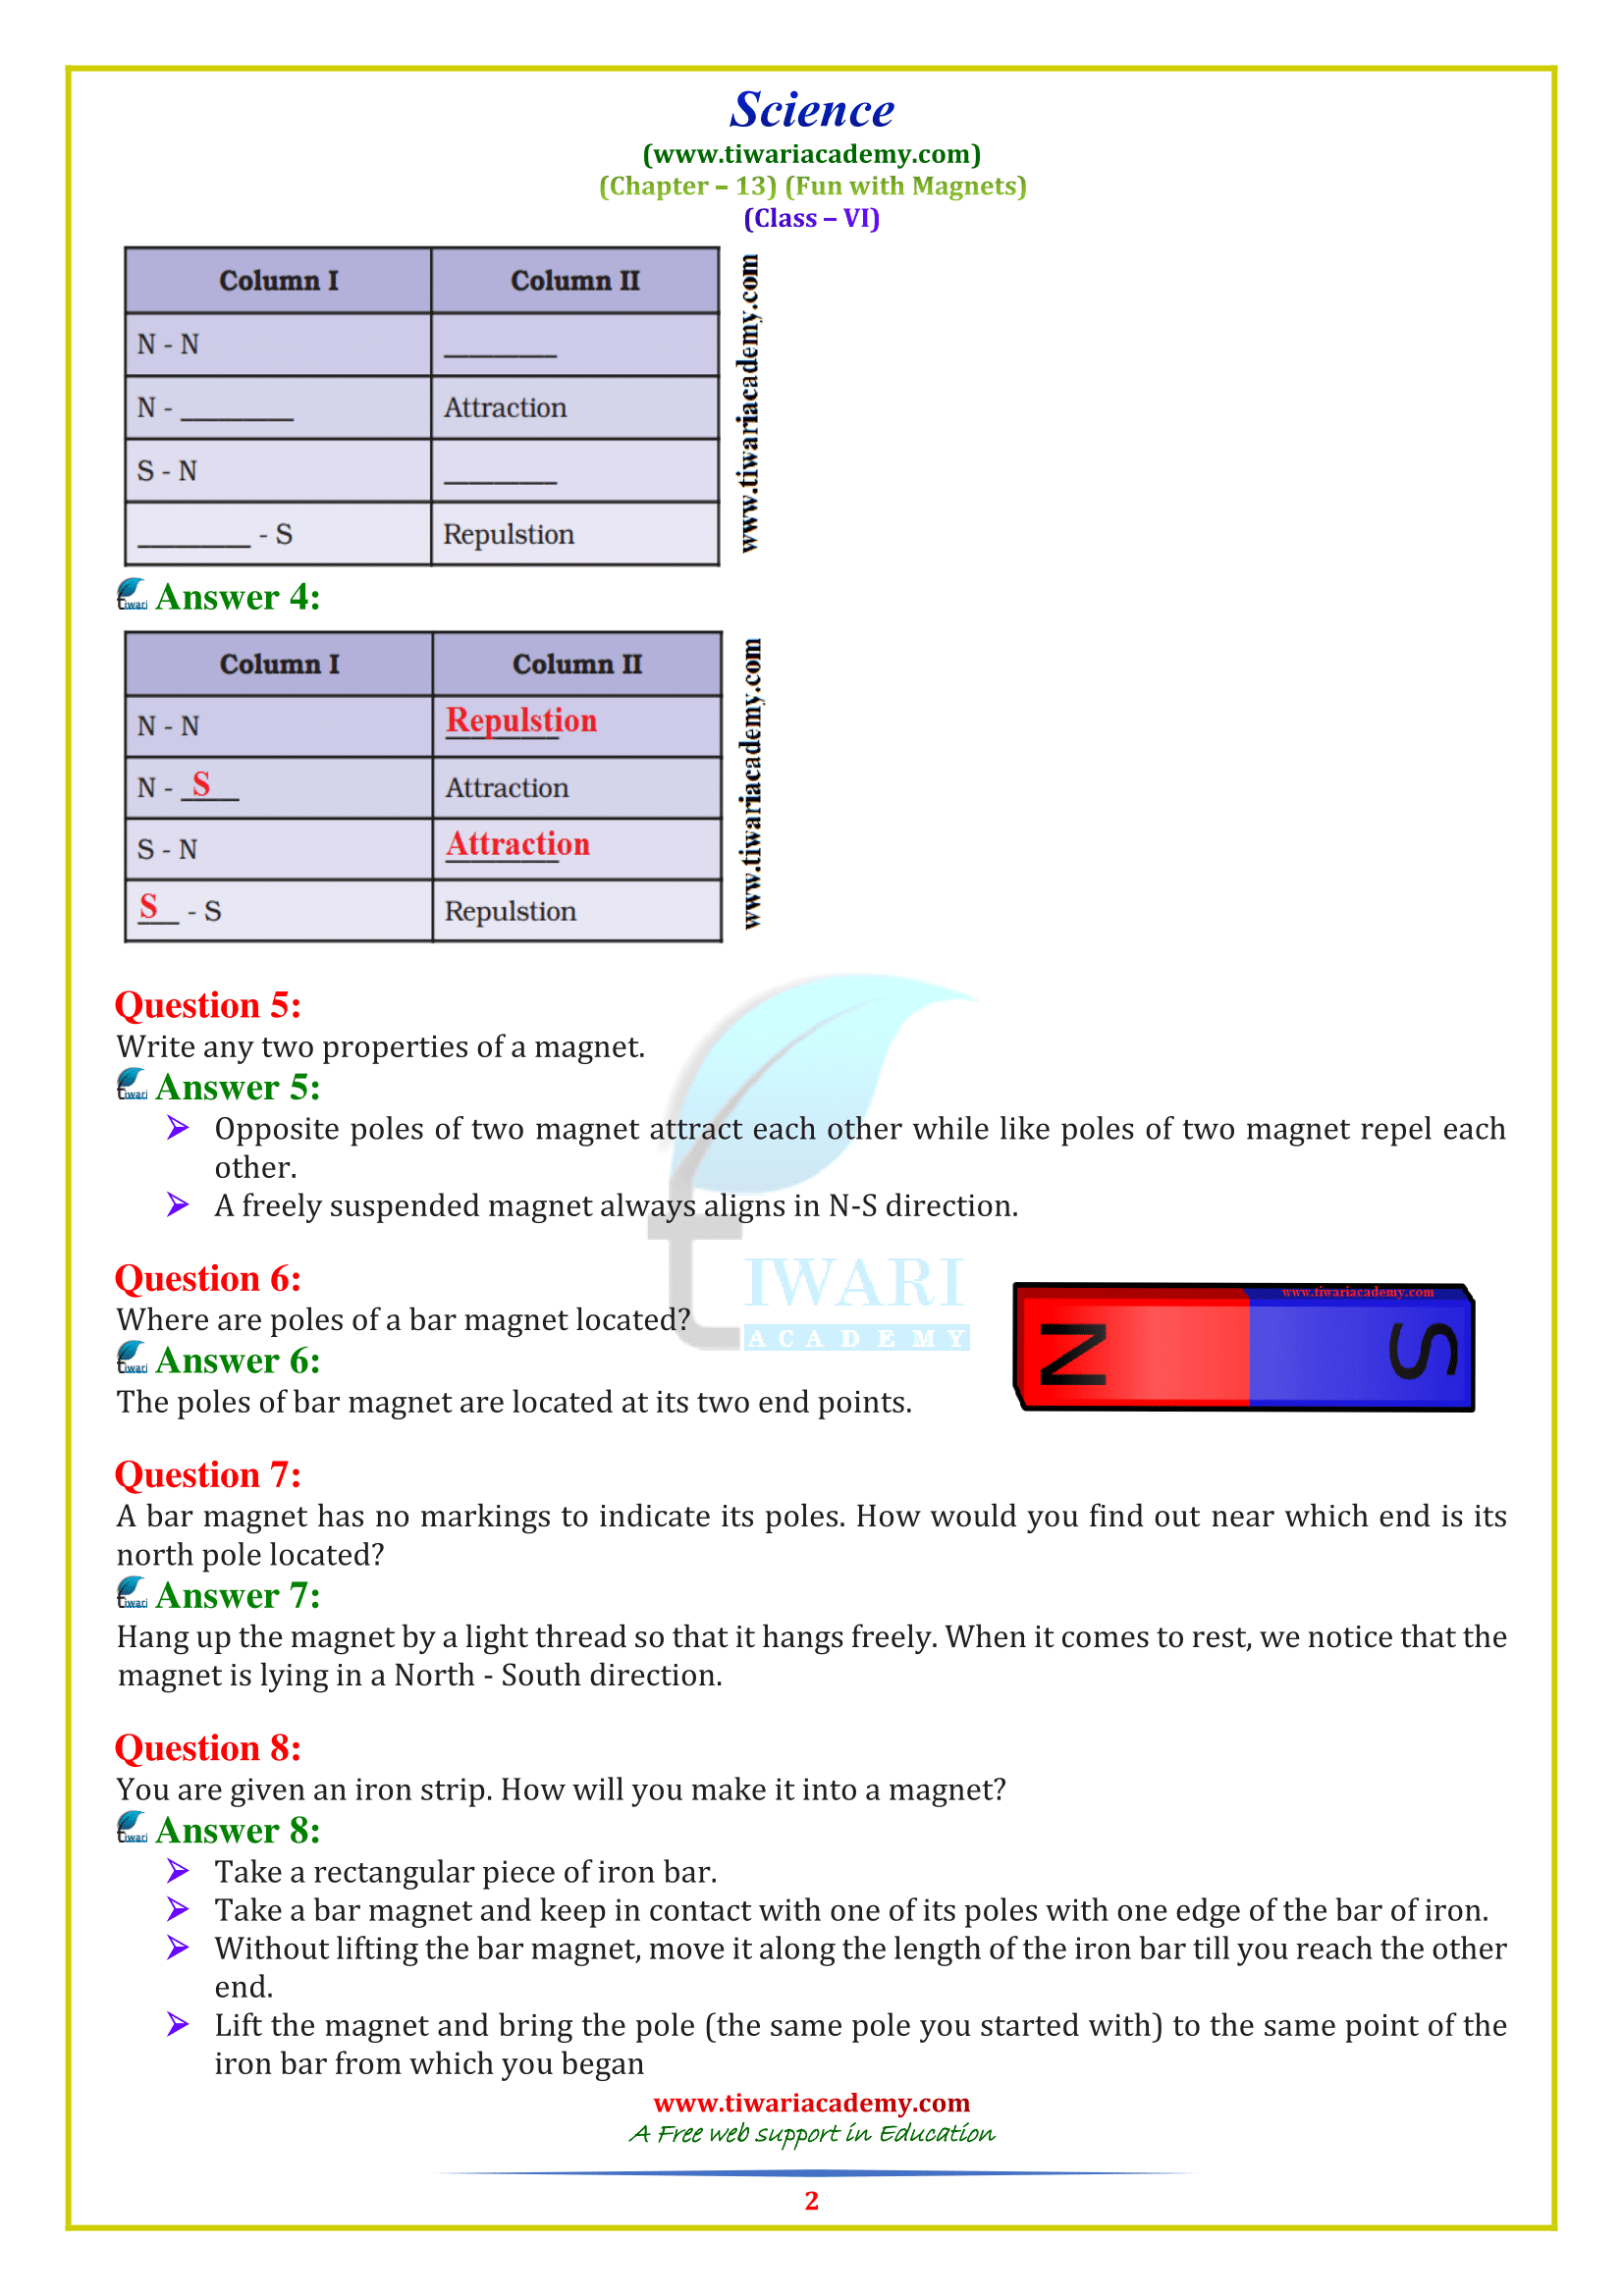 NCERT Solutions for Class 6 Science Chapter 13 Fun with Magnets in PDF Download